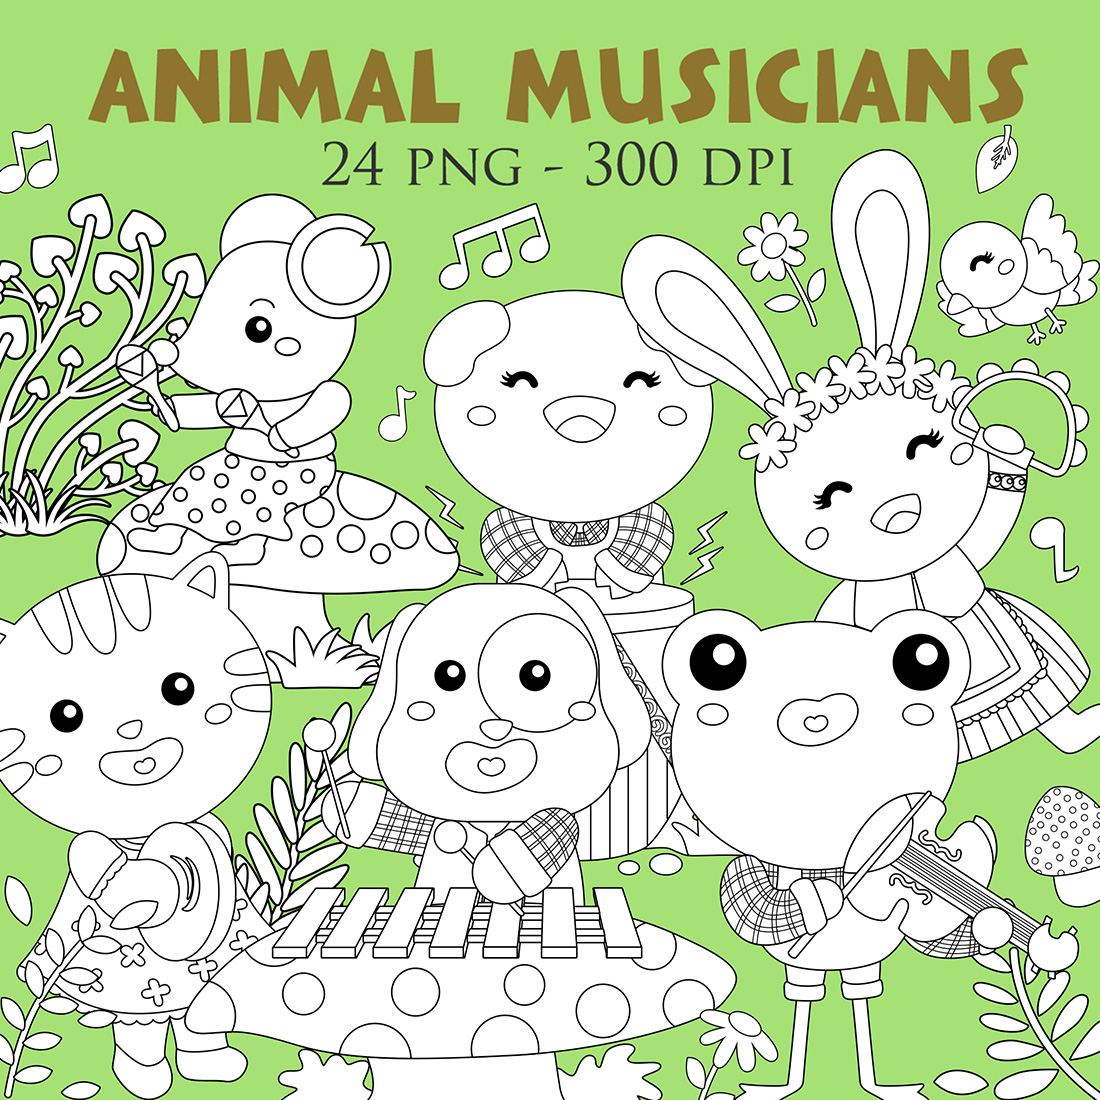 Colorful Cute and Funny Animal Musicians Playing Learning Performance Musical Instrumental Melody Sing Cartoon Digital Stamp Outline Black and White cover image.